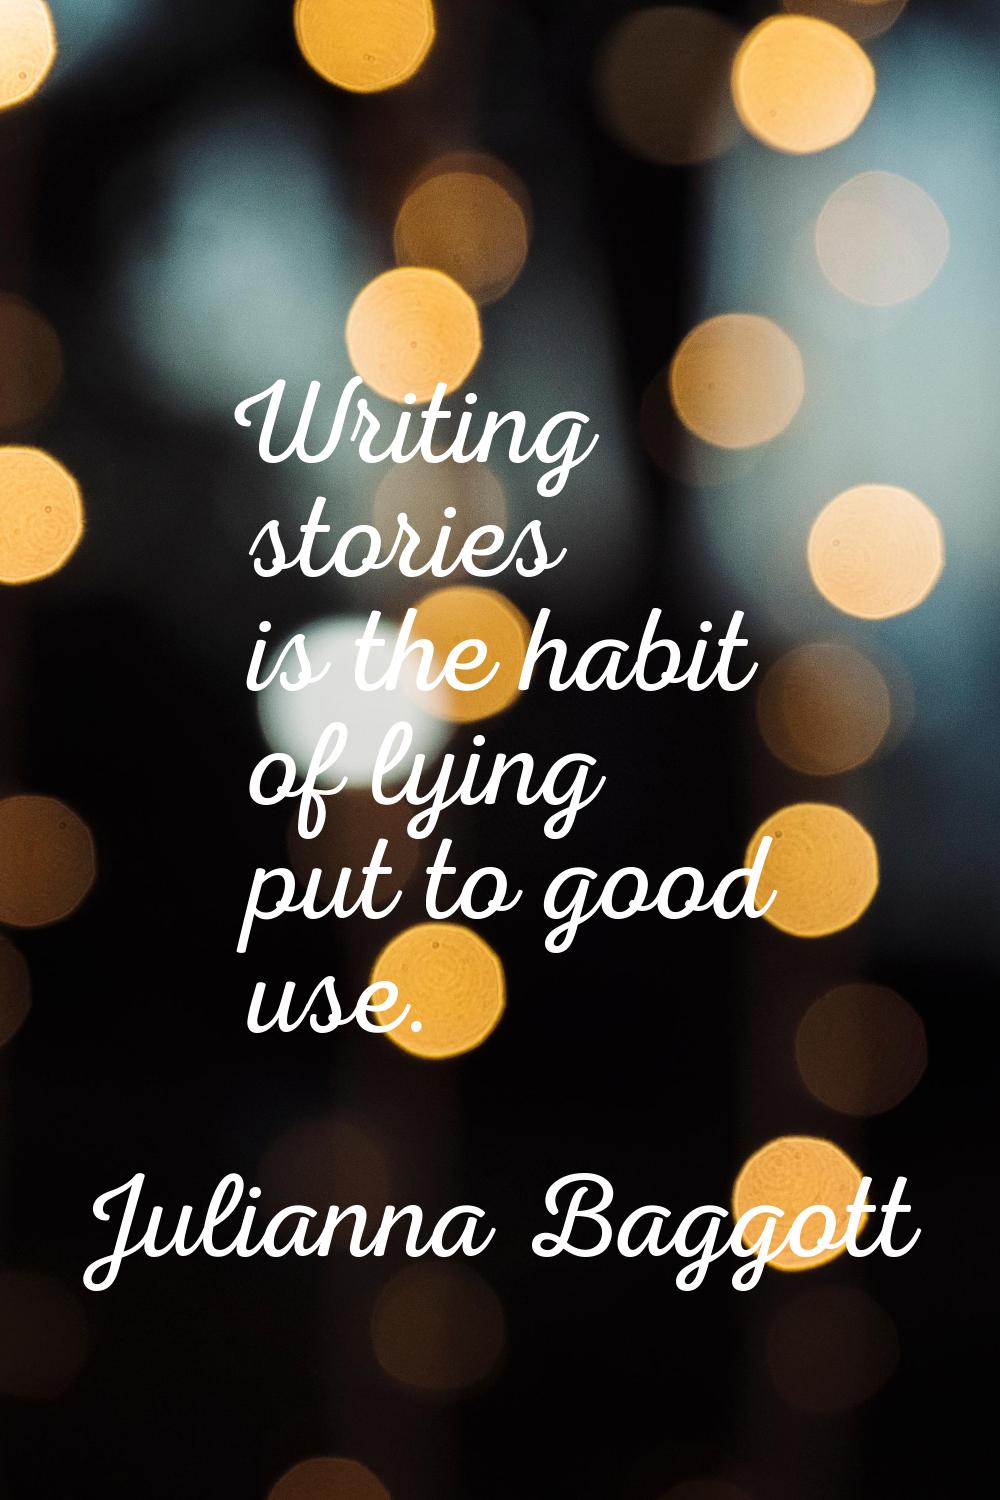 Writing stories is the habit of lying put to good use.